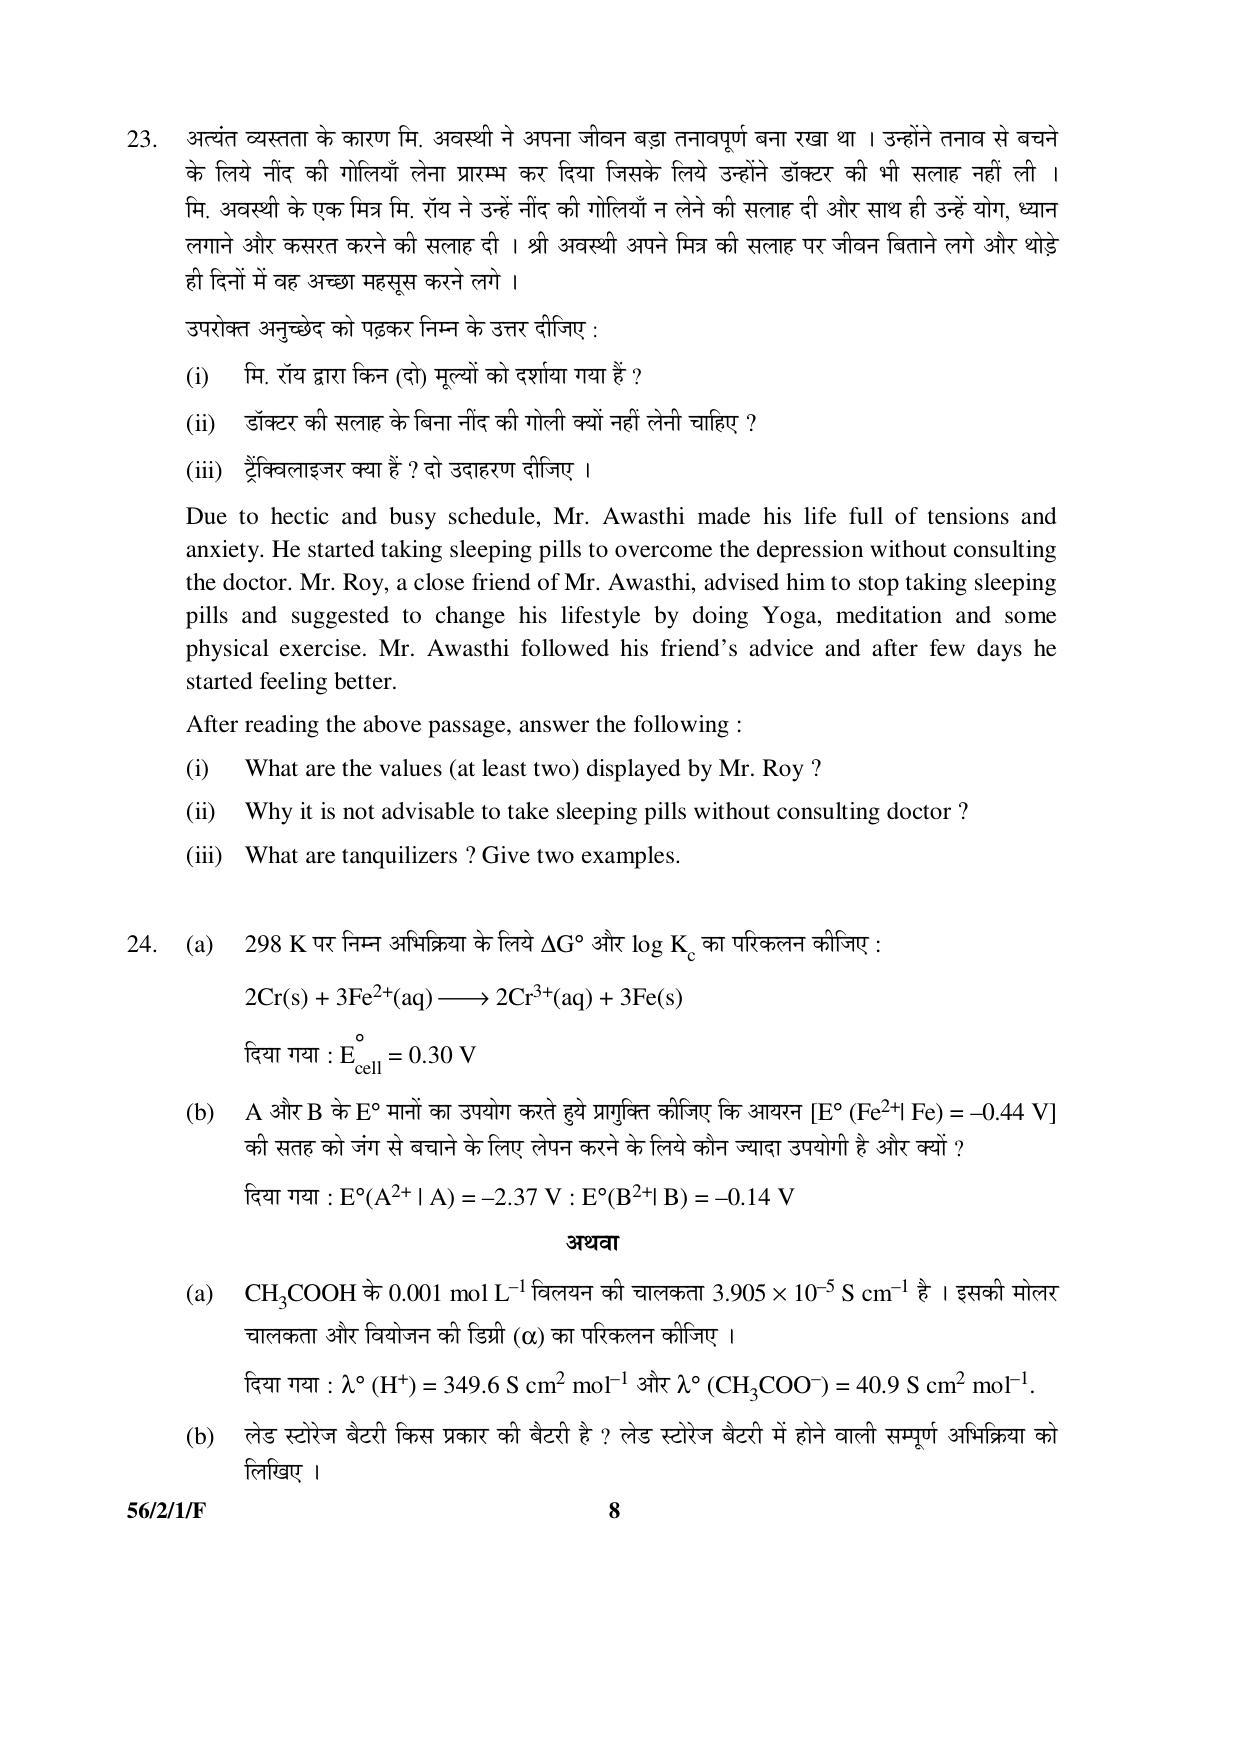 CBSE Class 12 56-2-1-F _Chemistry_ 2016 Question Paper - Page 8